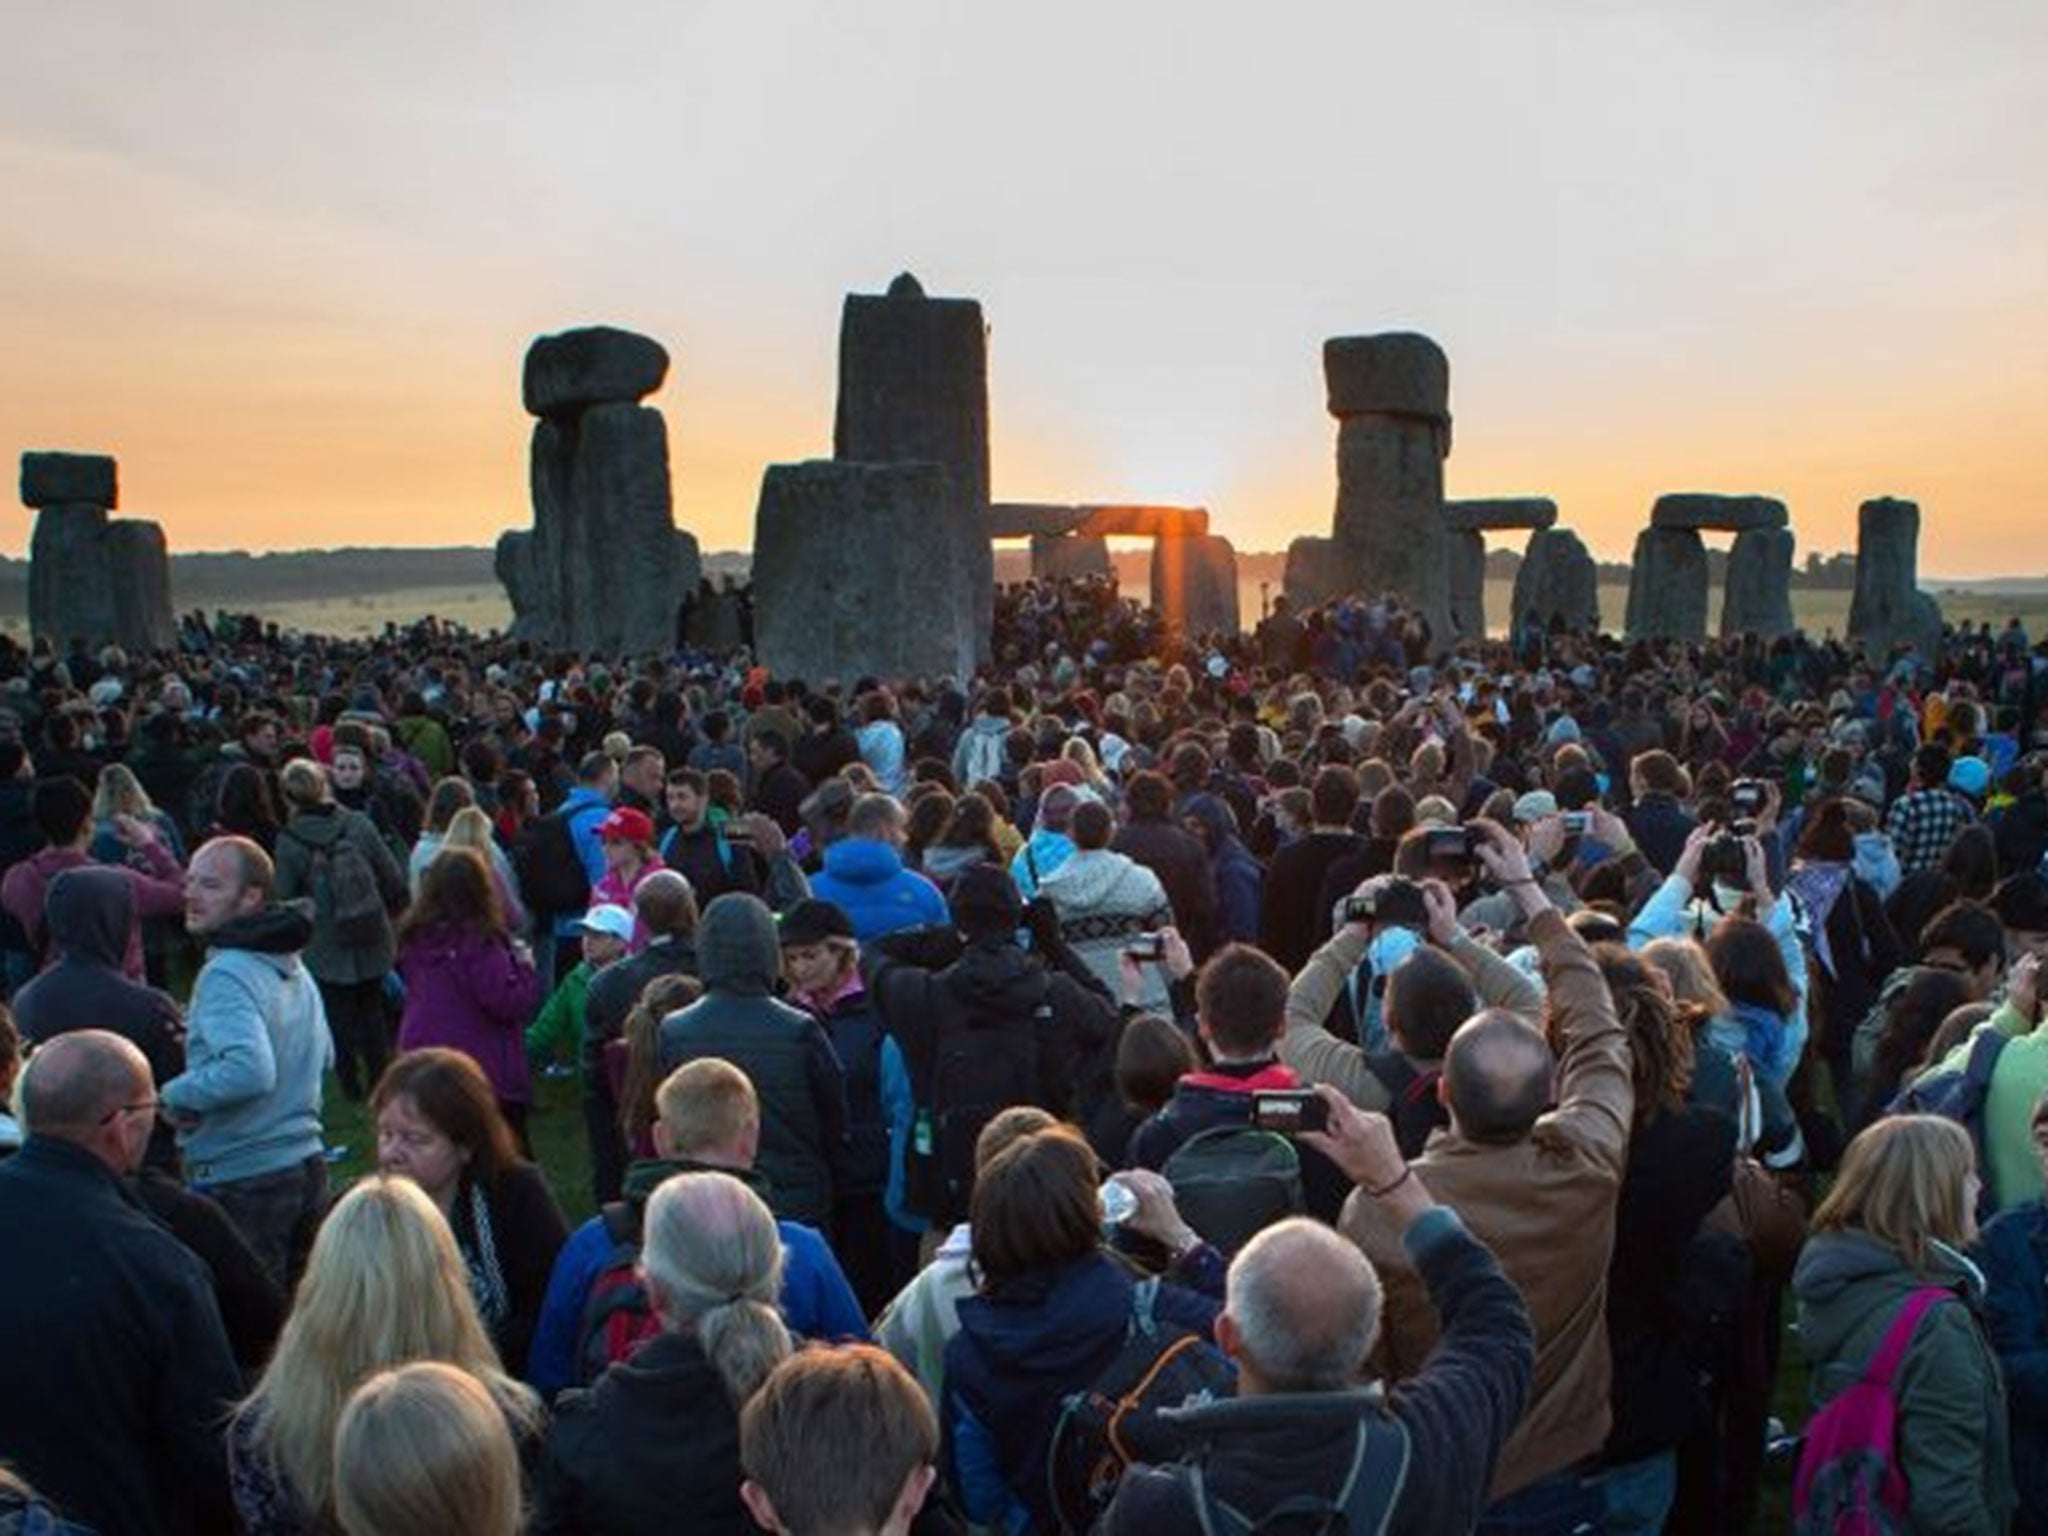 Thousands turn out to the summer solstice at Stonehenge The